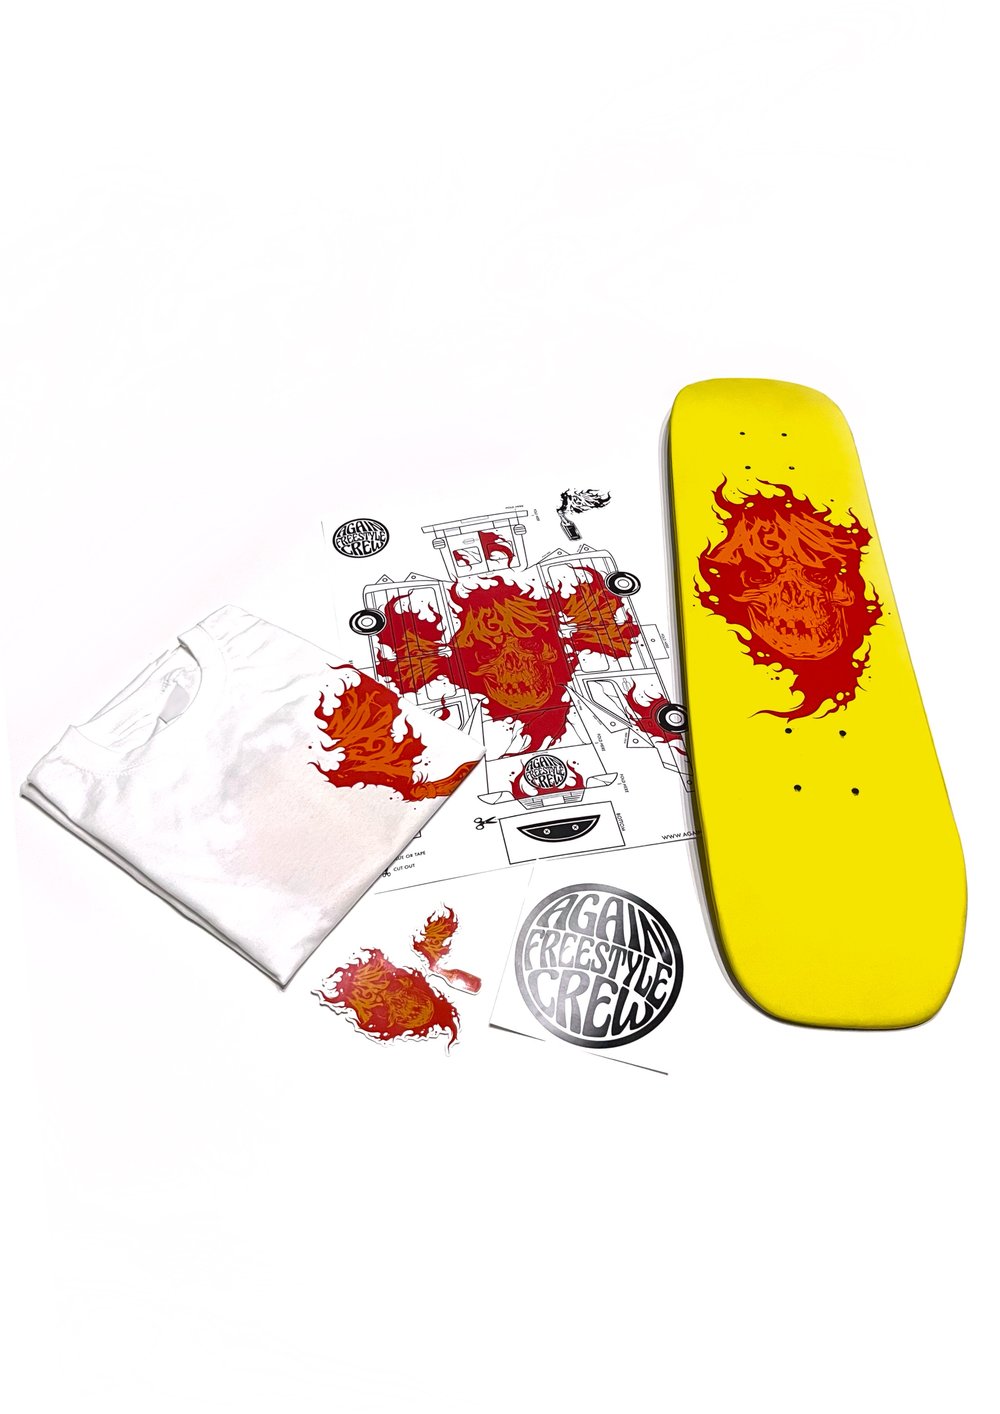 FREESTYLE SKATEBOARD "UNDEFINED REASON" LIMITED EDITION BUNDLE YELLOW 7.3